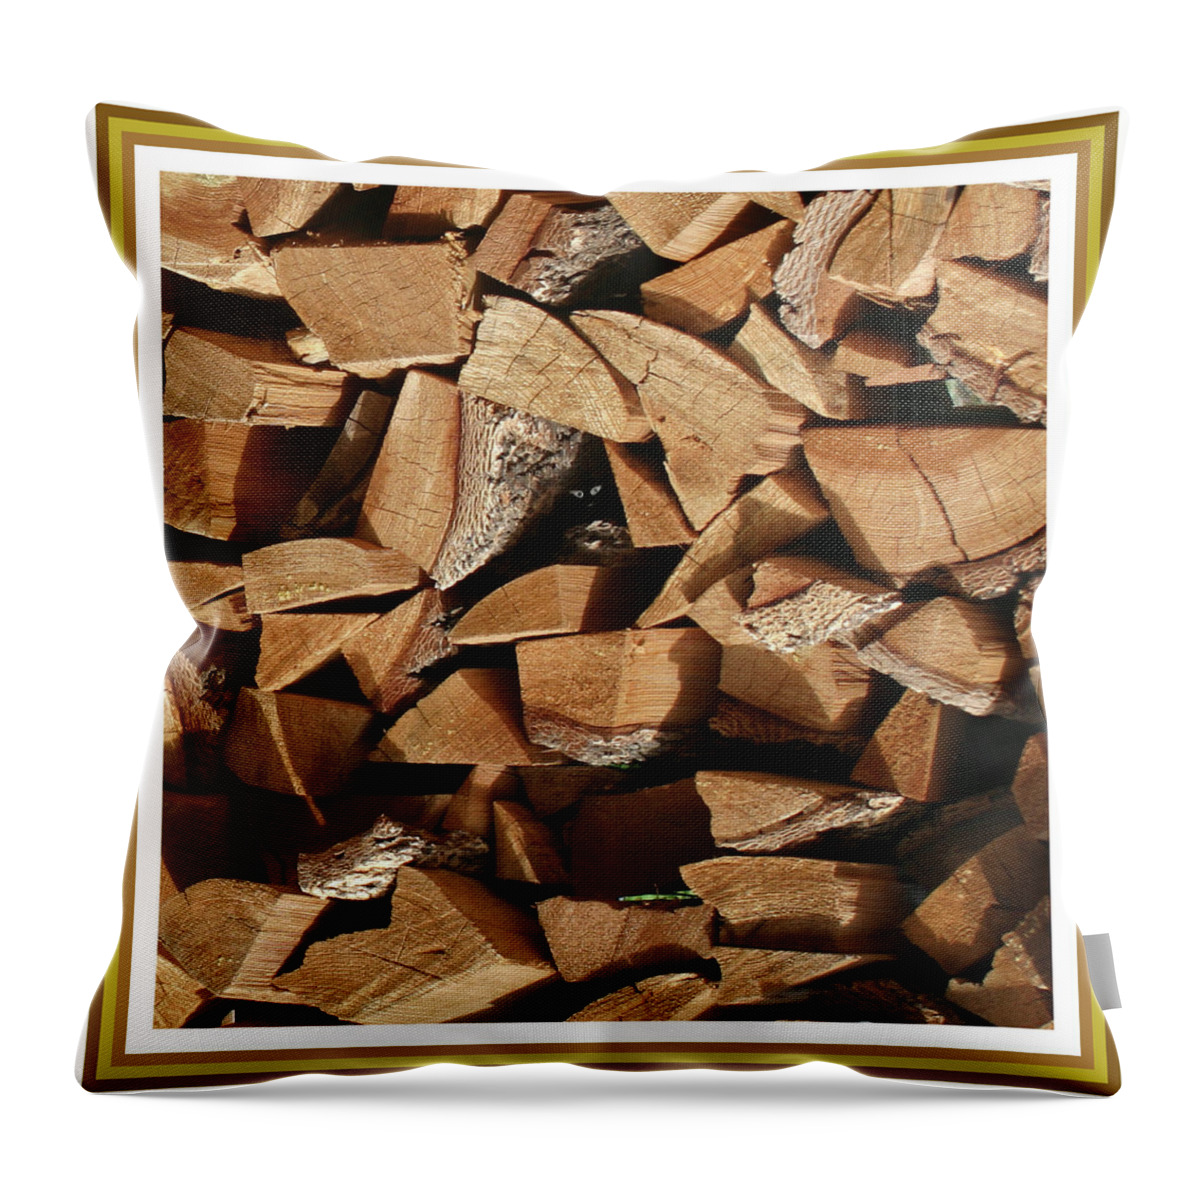 Find The Little Cutie In The Stacked Wood? Throw Pillow featuring the photograph Cutie Critter in the wood pile by Jack Pumphrey